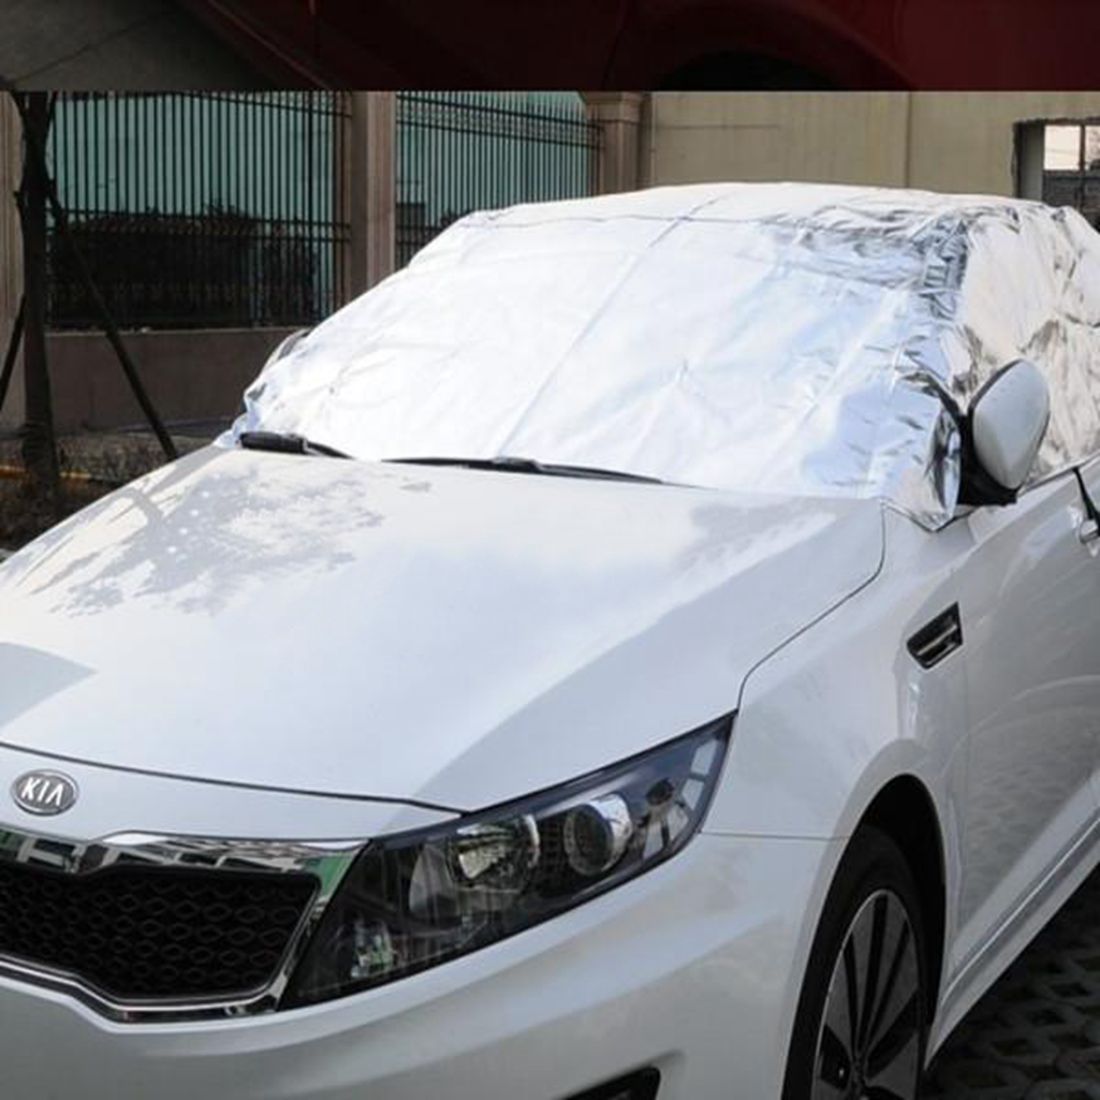 Waterproof-Outdoor-Car-Top-Cover-Sun-Rain-Dust-Snow-Leaf-Protection-79950